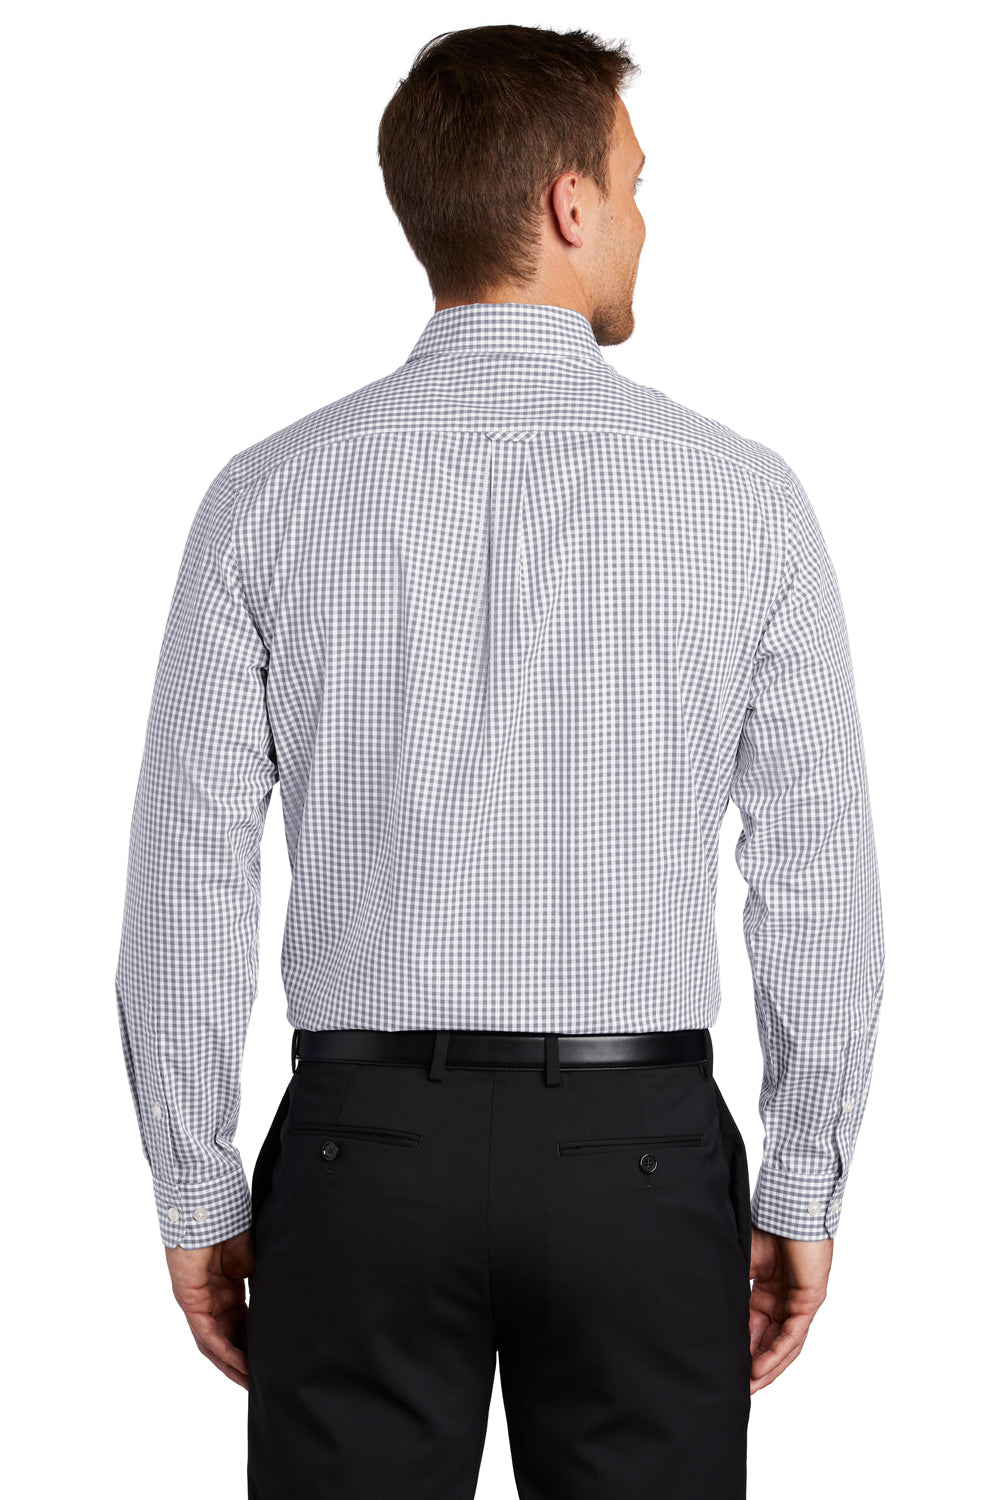 Port Authority Mens Broadcloth Gingham Long Sleeve Button Down Shirt w/ Pocket Gusty Grey/White Side